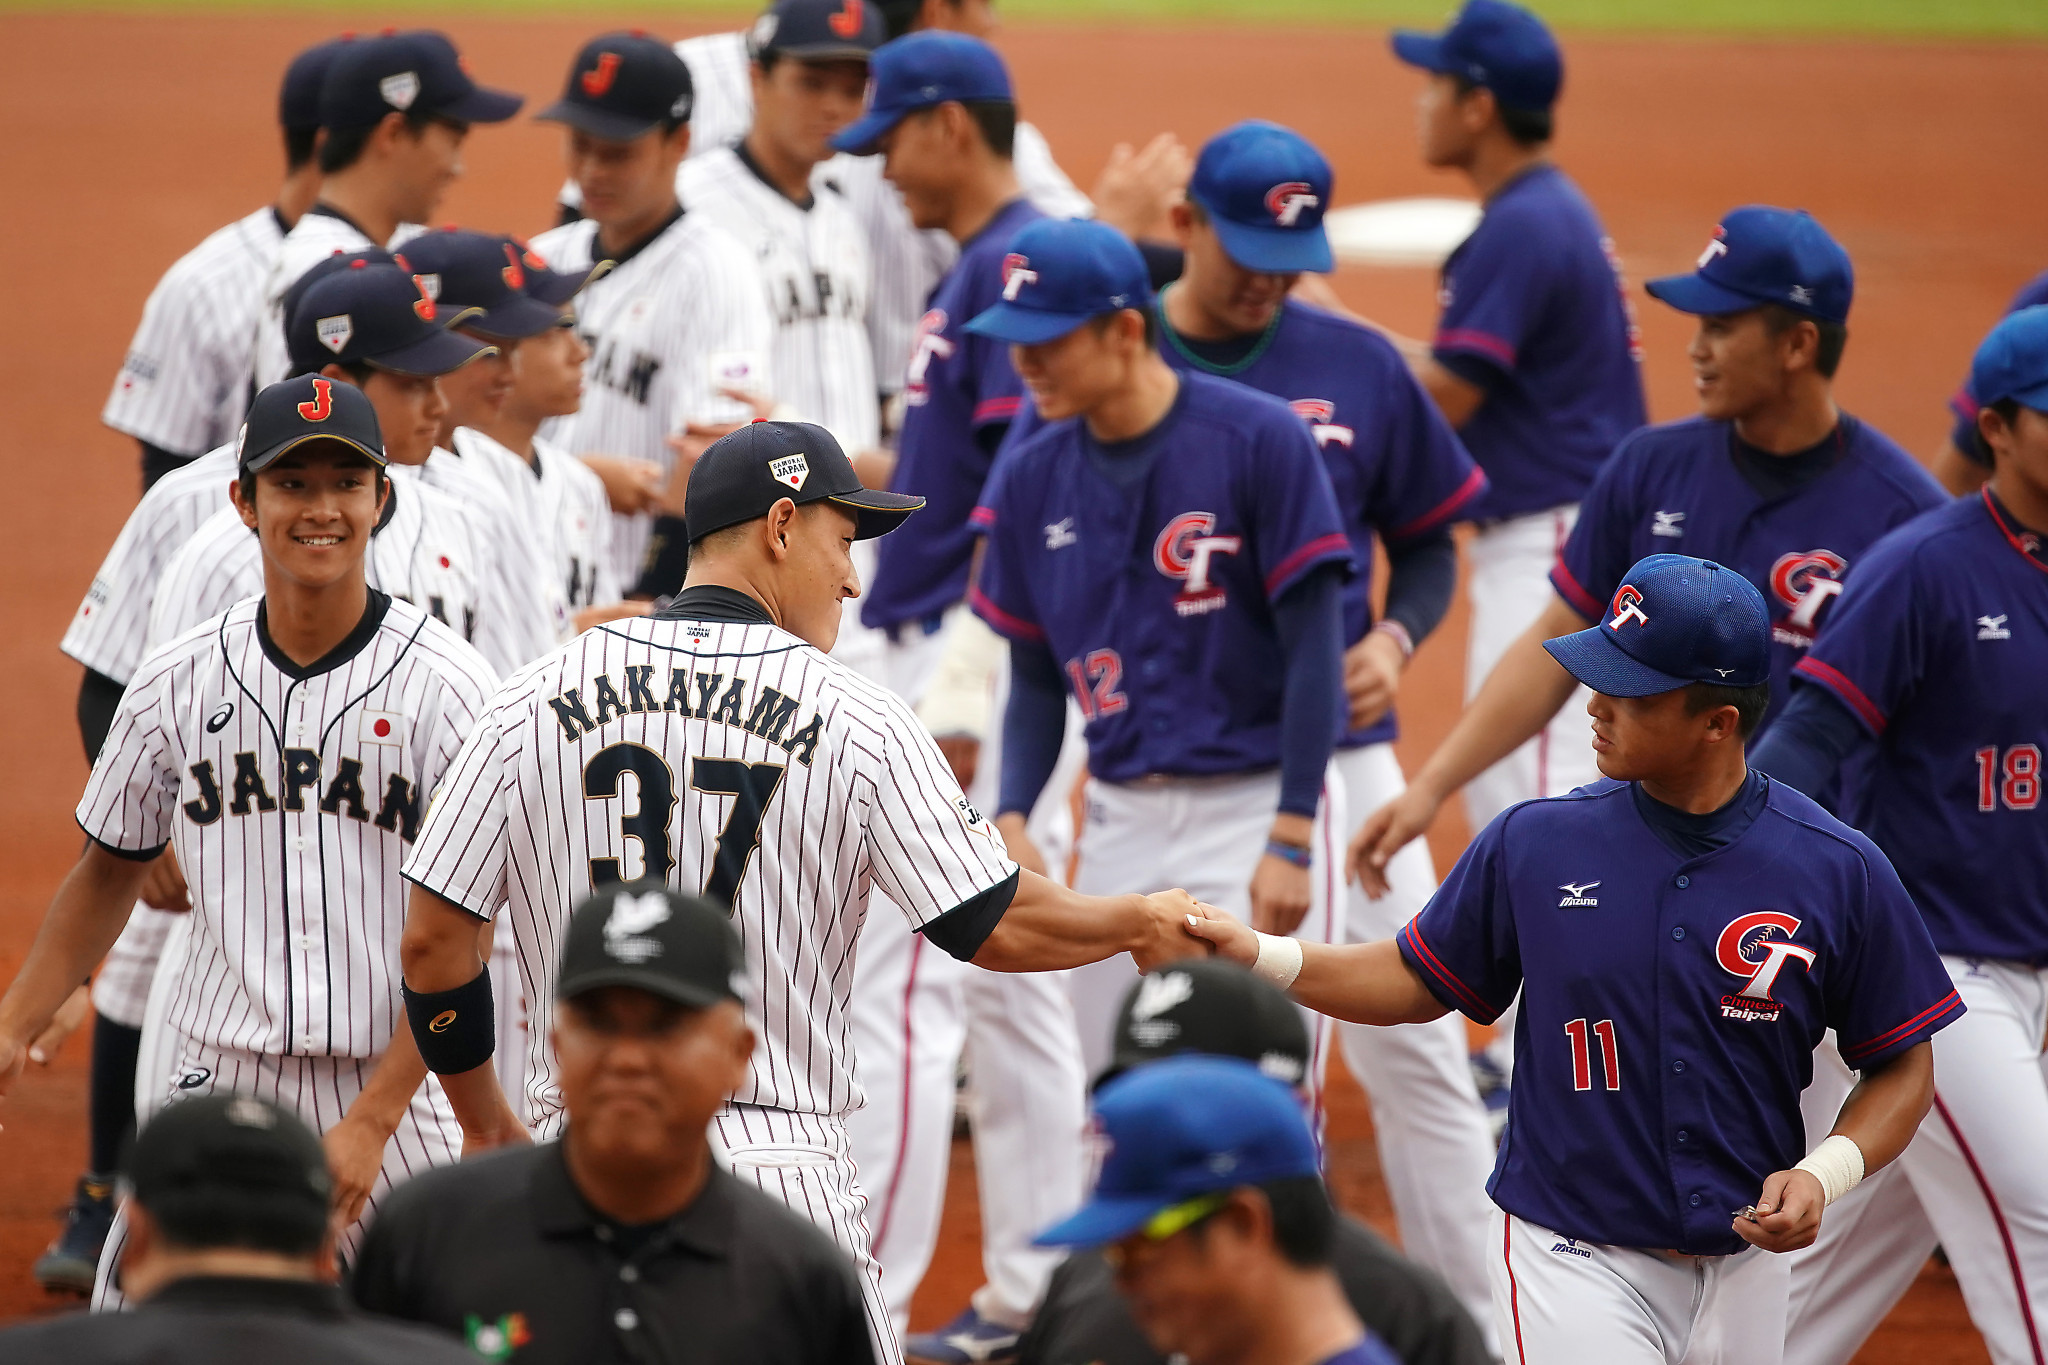 Japan and Chinese Taipei will meet in the final of the tournament tomorrow ©FISU